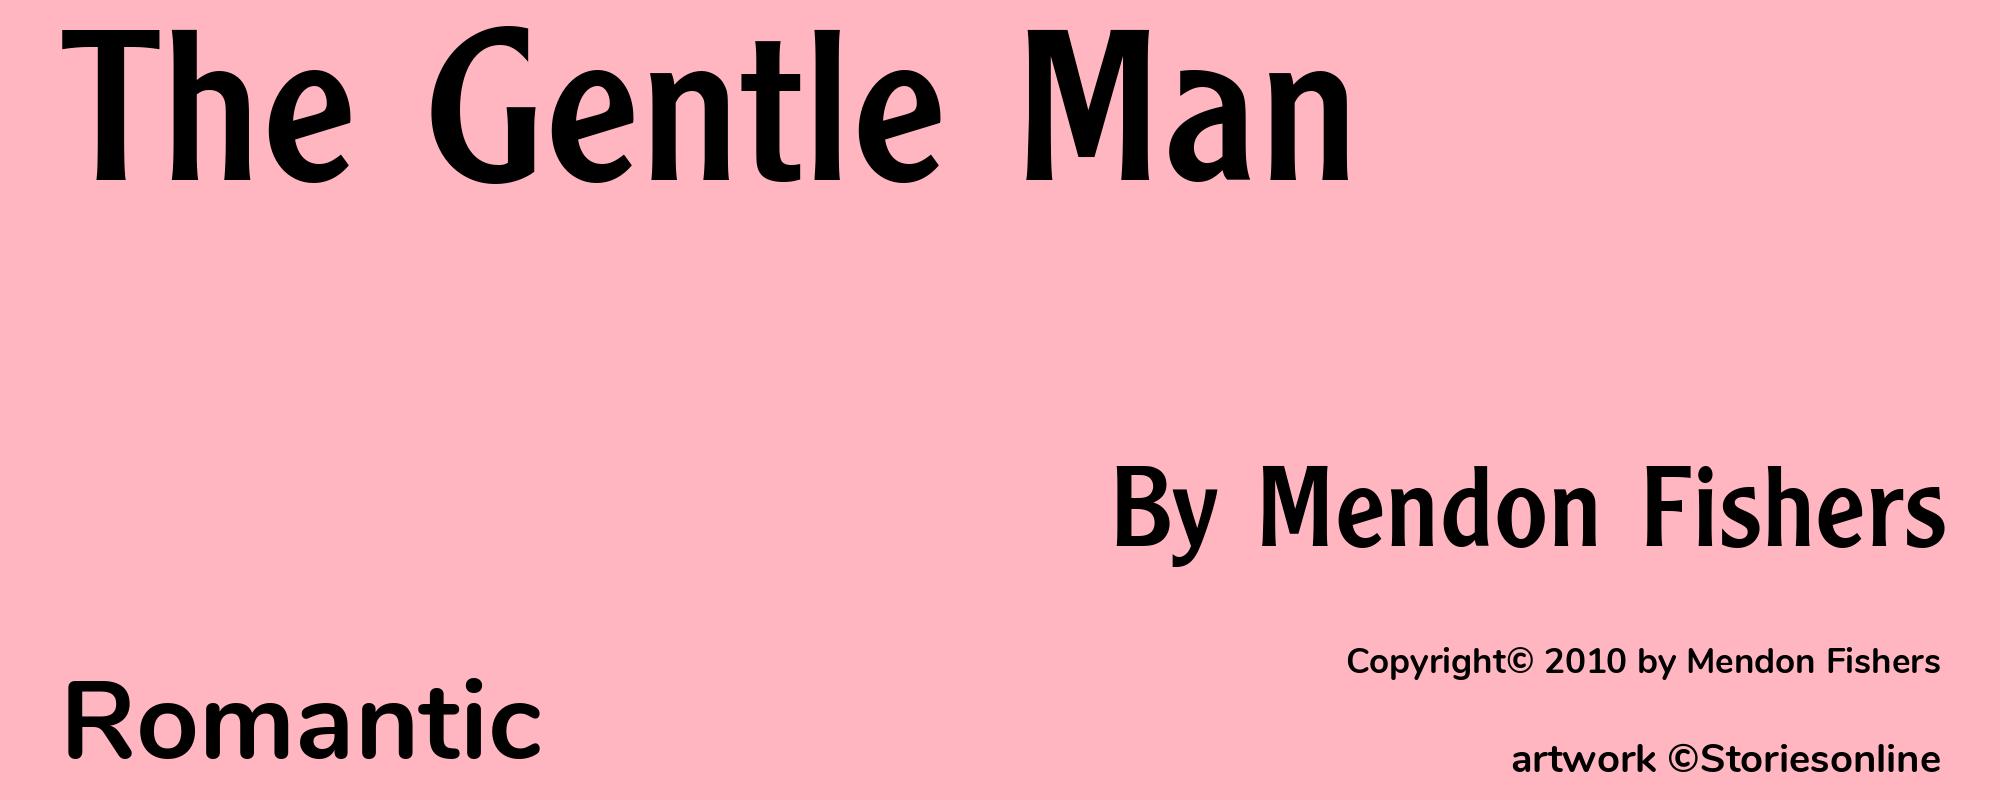 The Gentle Man - Cover